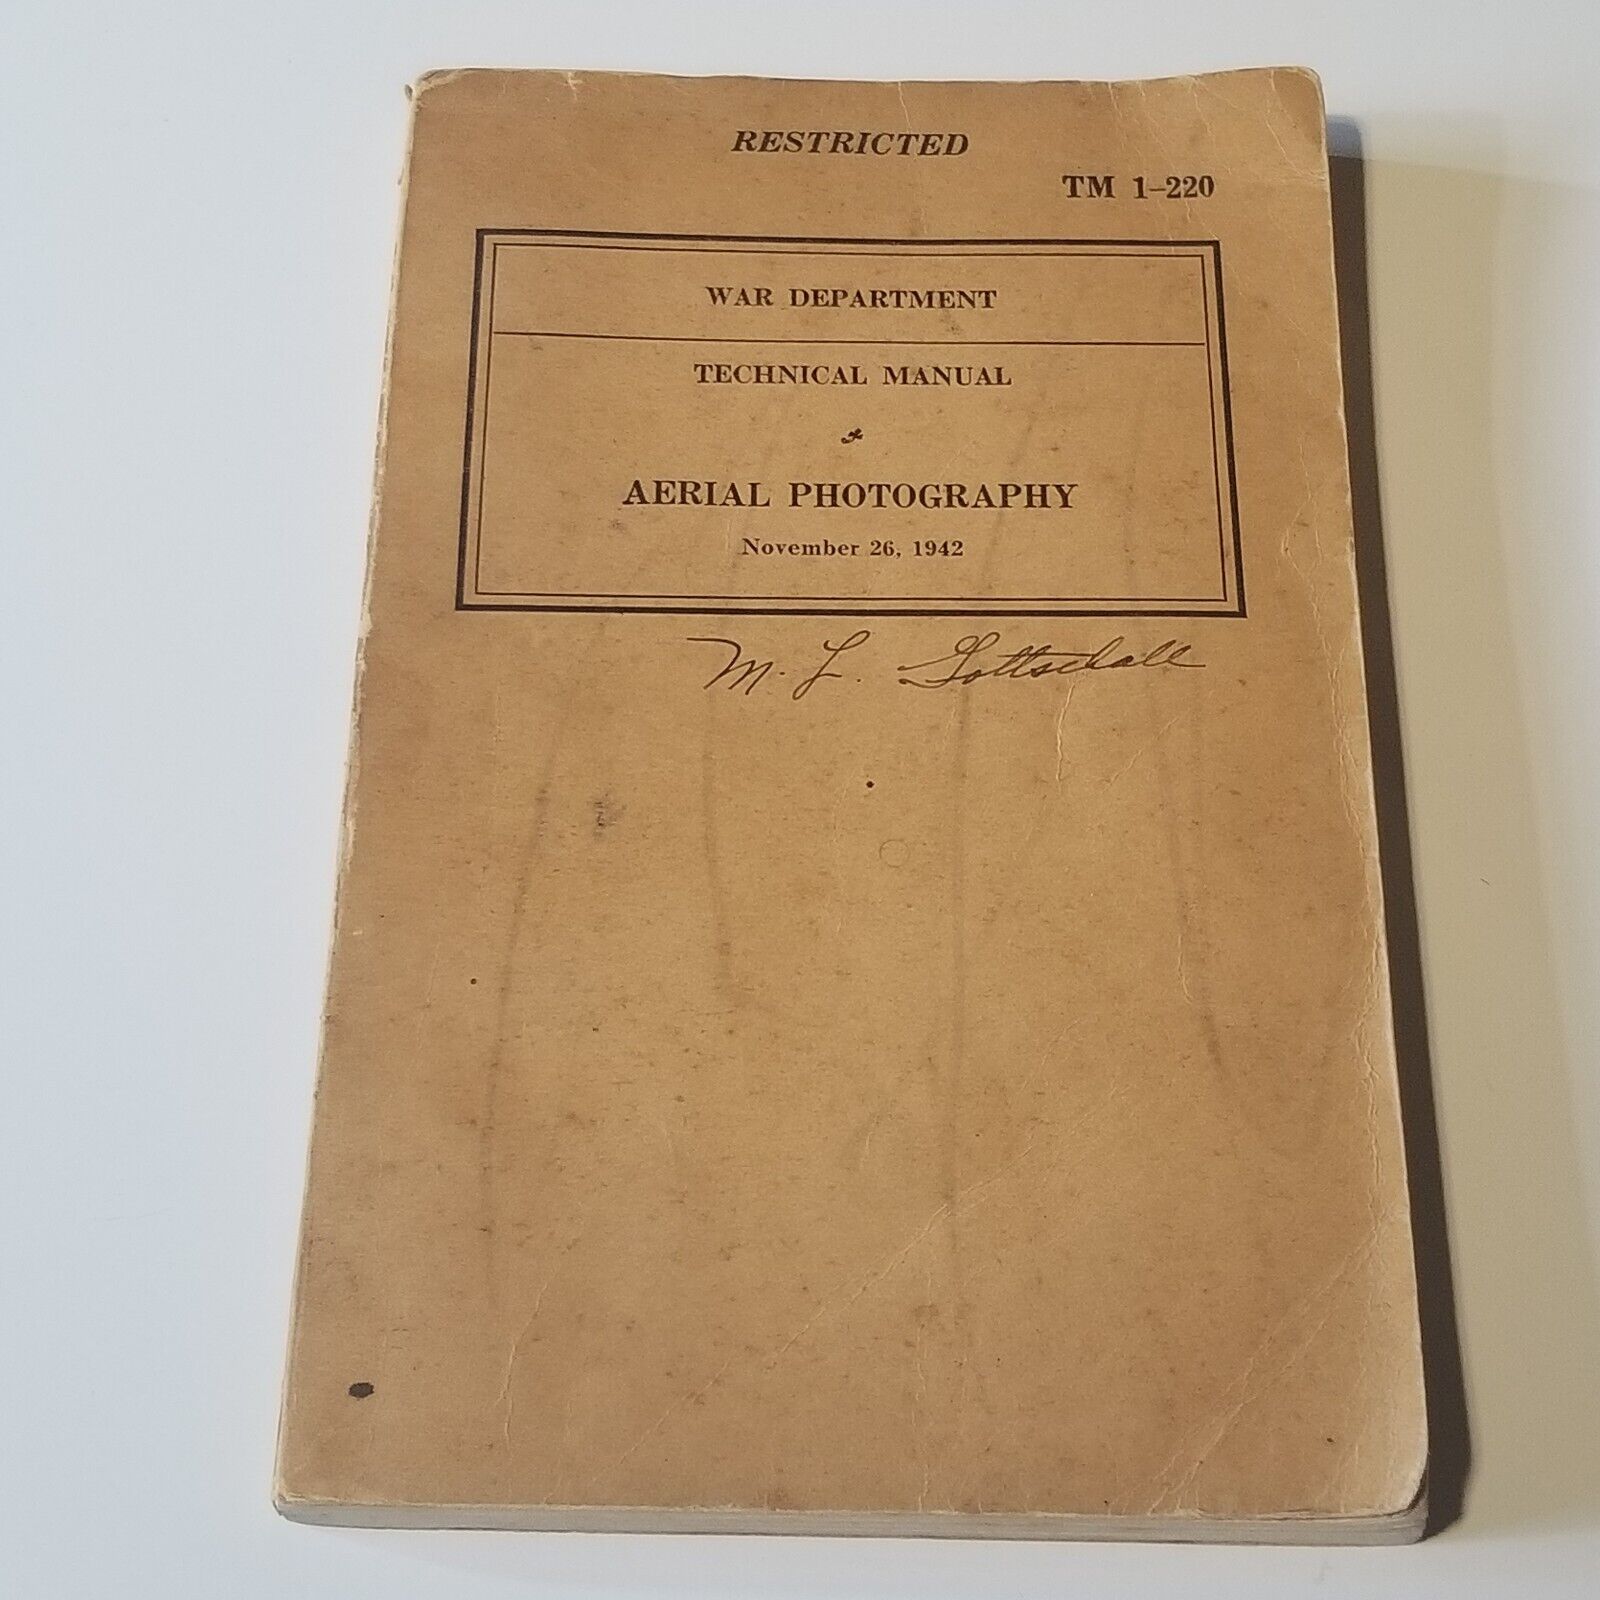 Vintage 1942 RESTRICTED War Department Technical Manual Aerial Photography